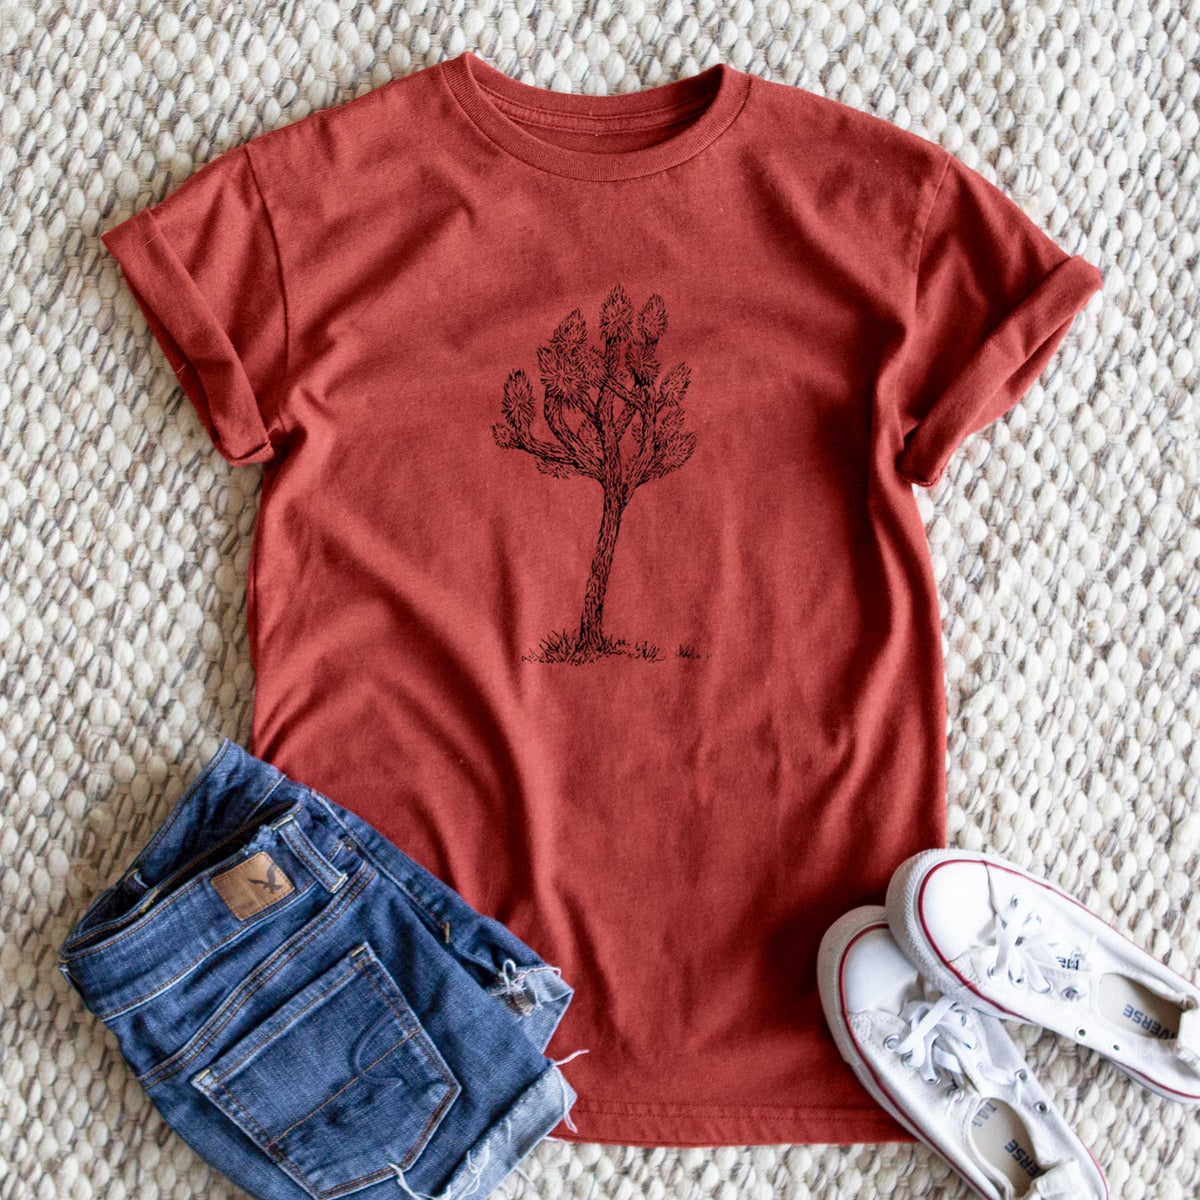 Yucca brevifolia - Joshua Tree - Unisex Recycled Eco Tee  - CLOSEOUT - FINAL SALE